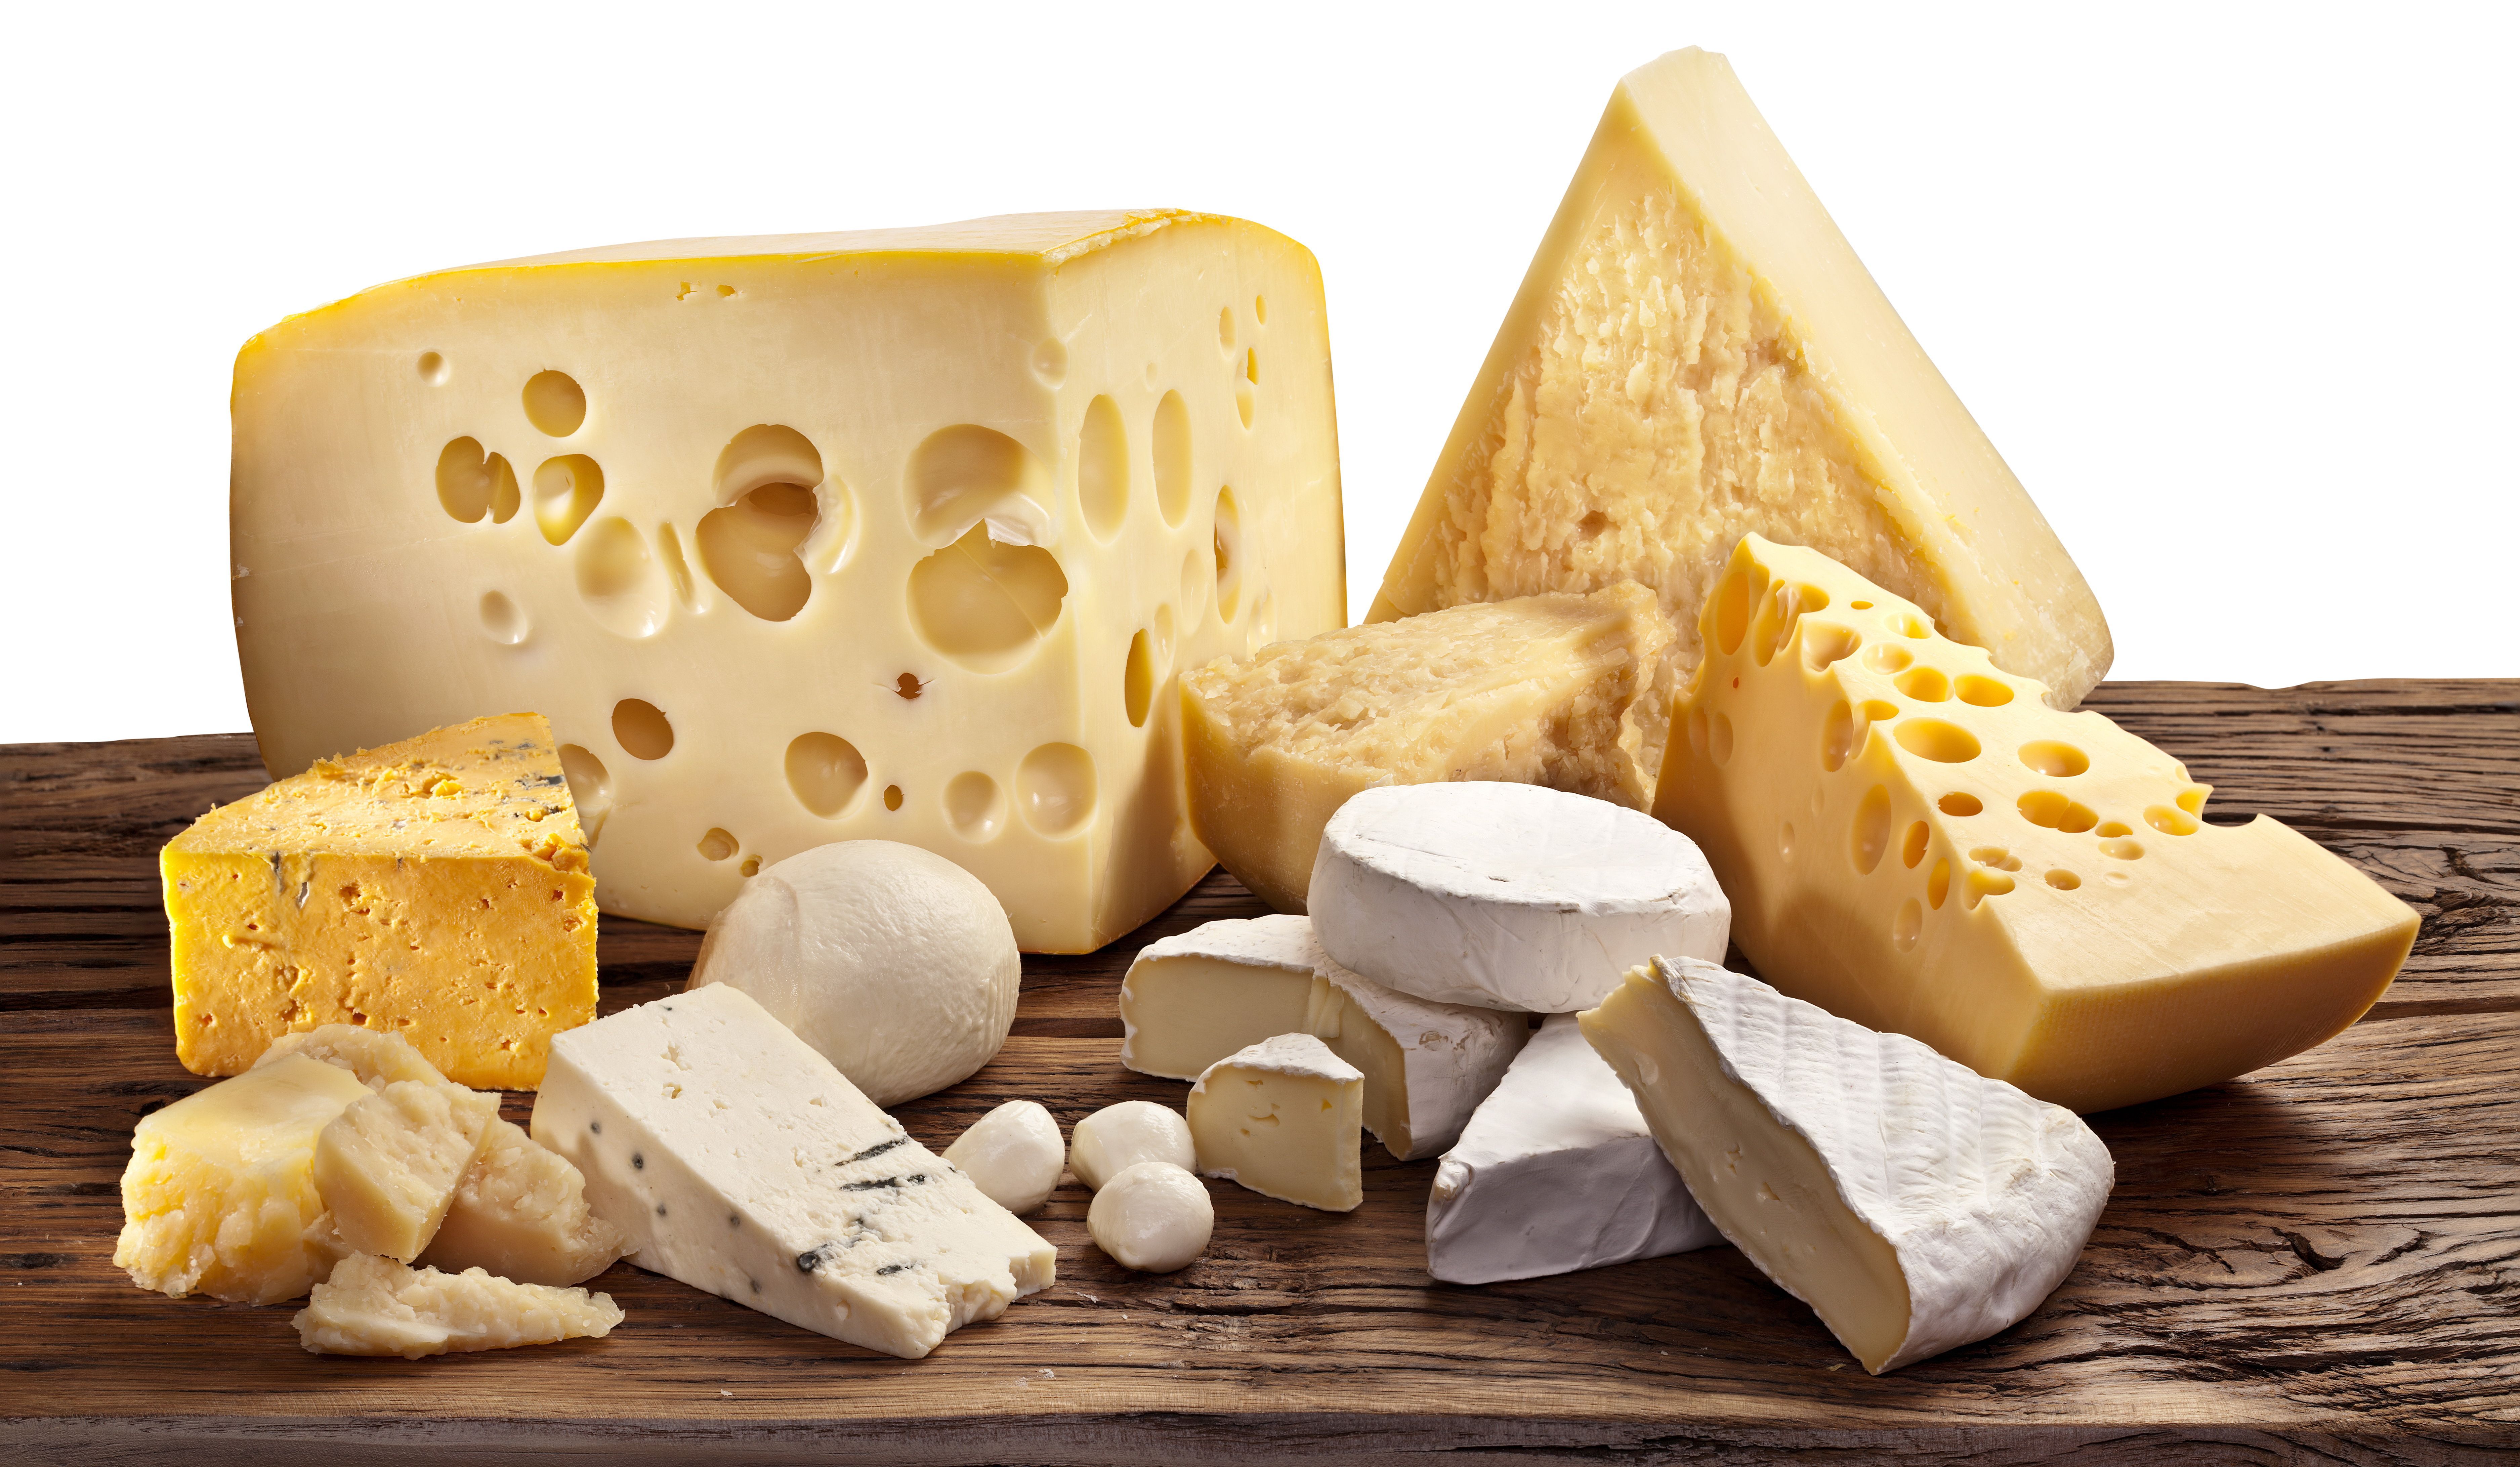 Cheese wallpapers hd, desktop backgrounds, images and pictures